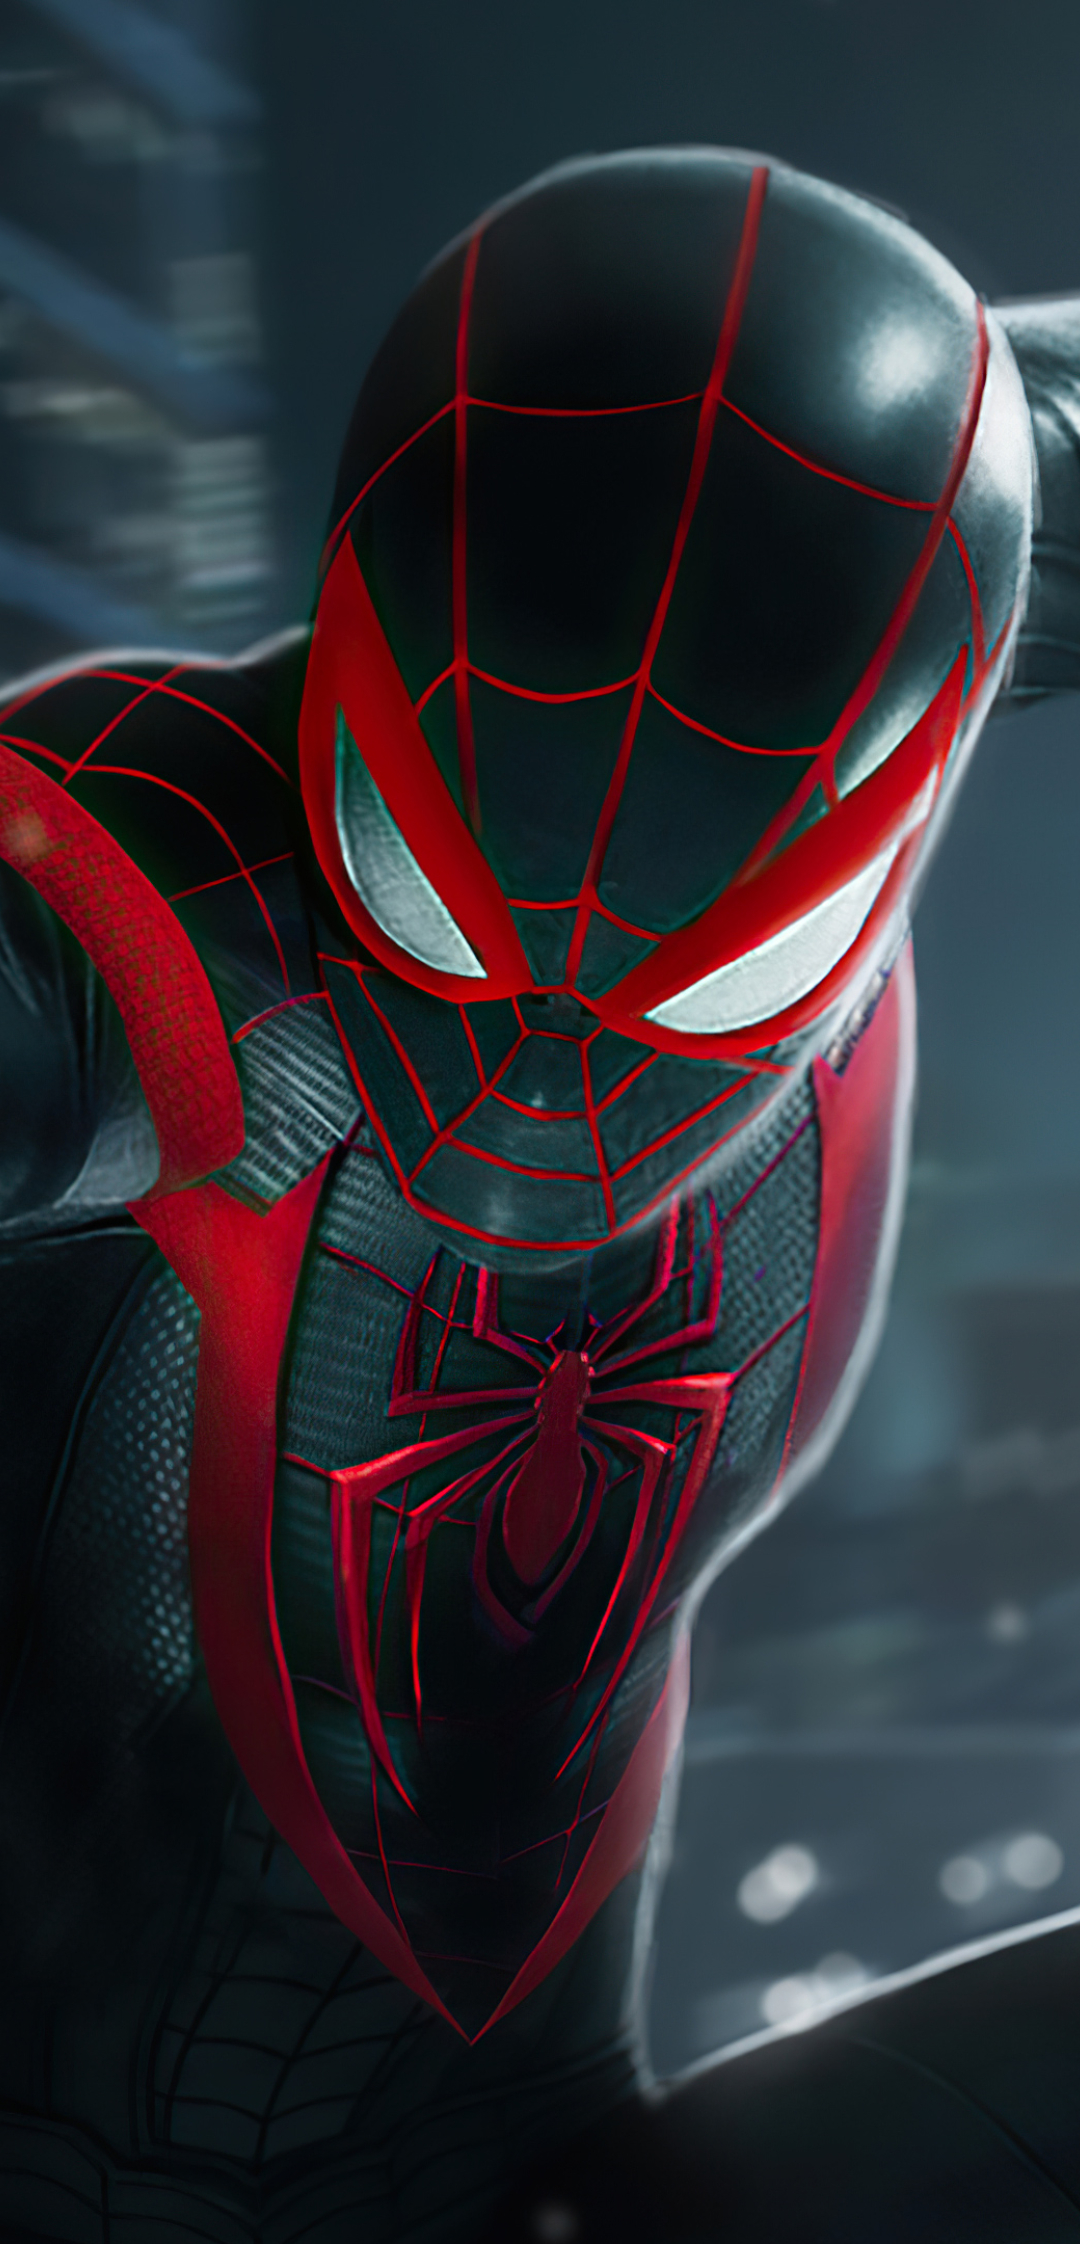 spider man miles morales apk download for android no verification